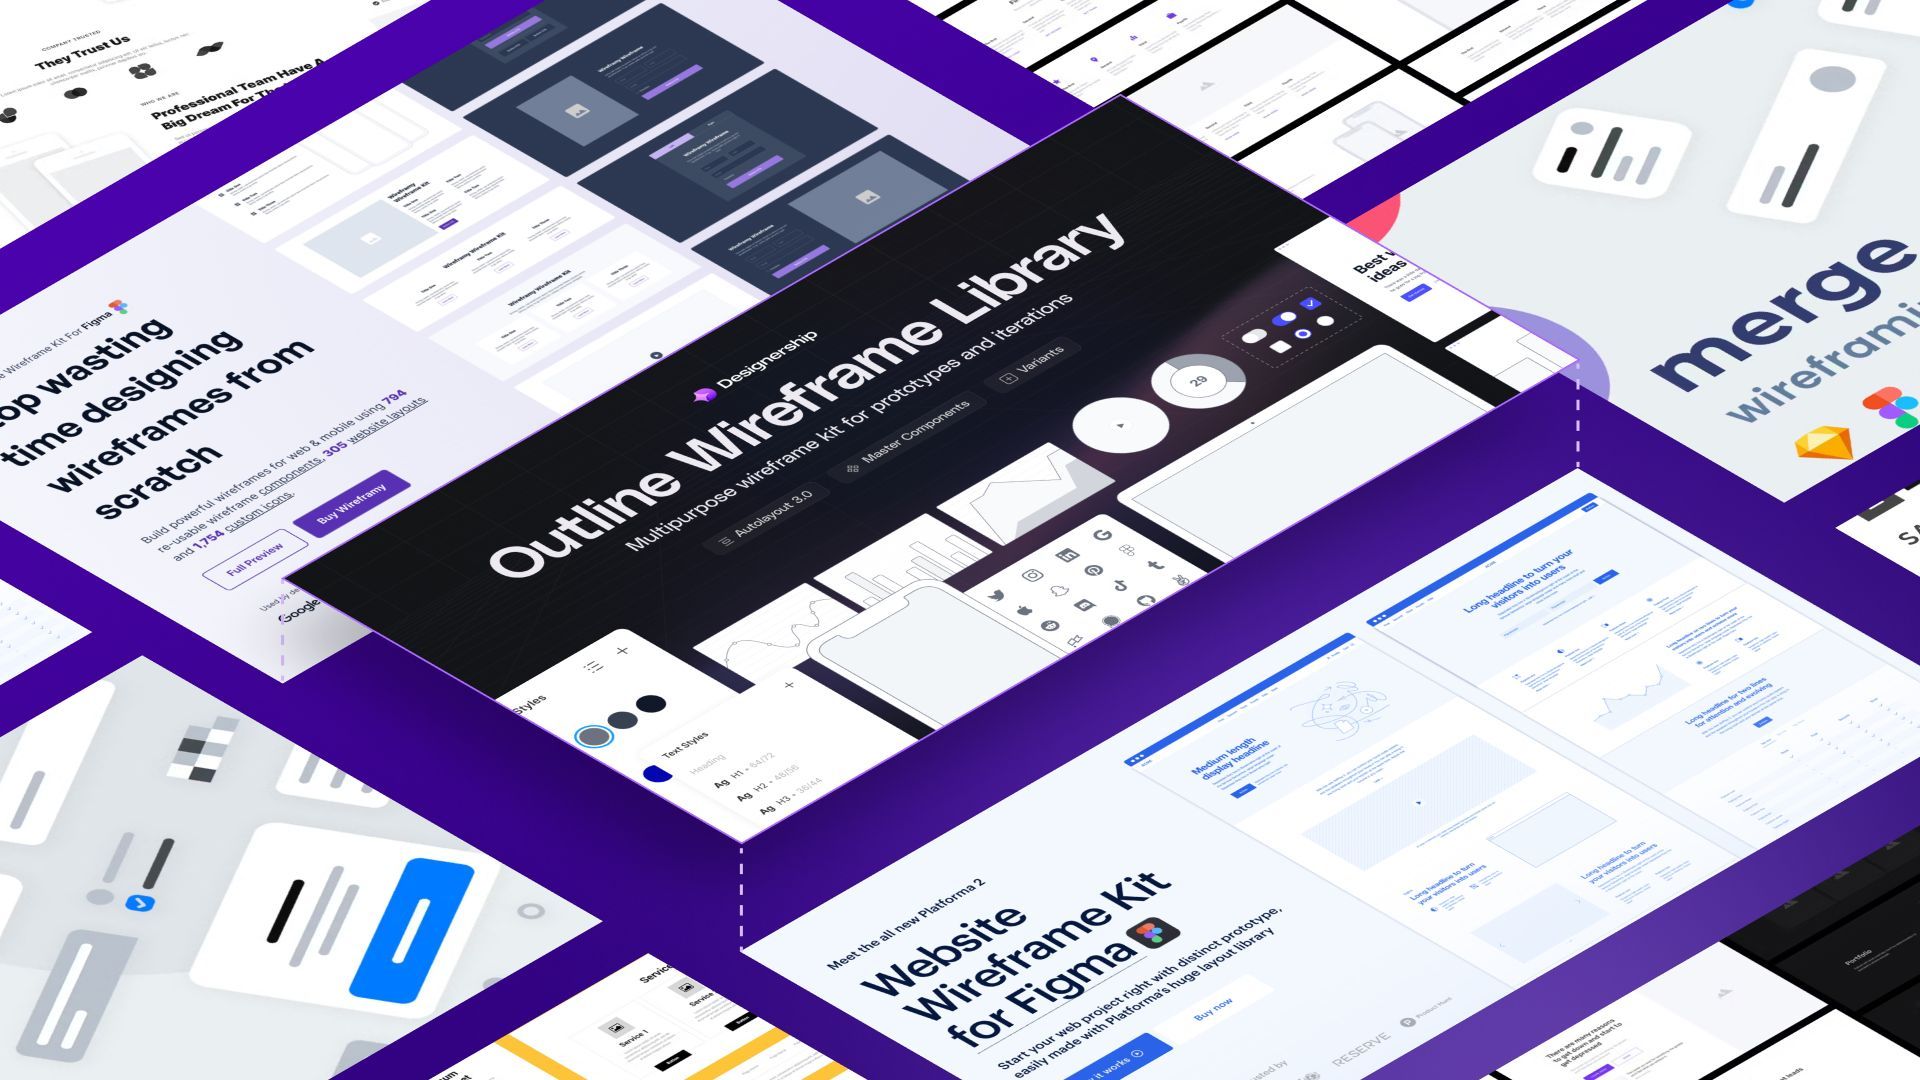 Wireframing and Prototyping Tools